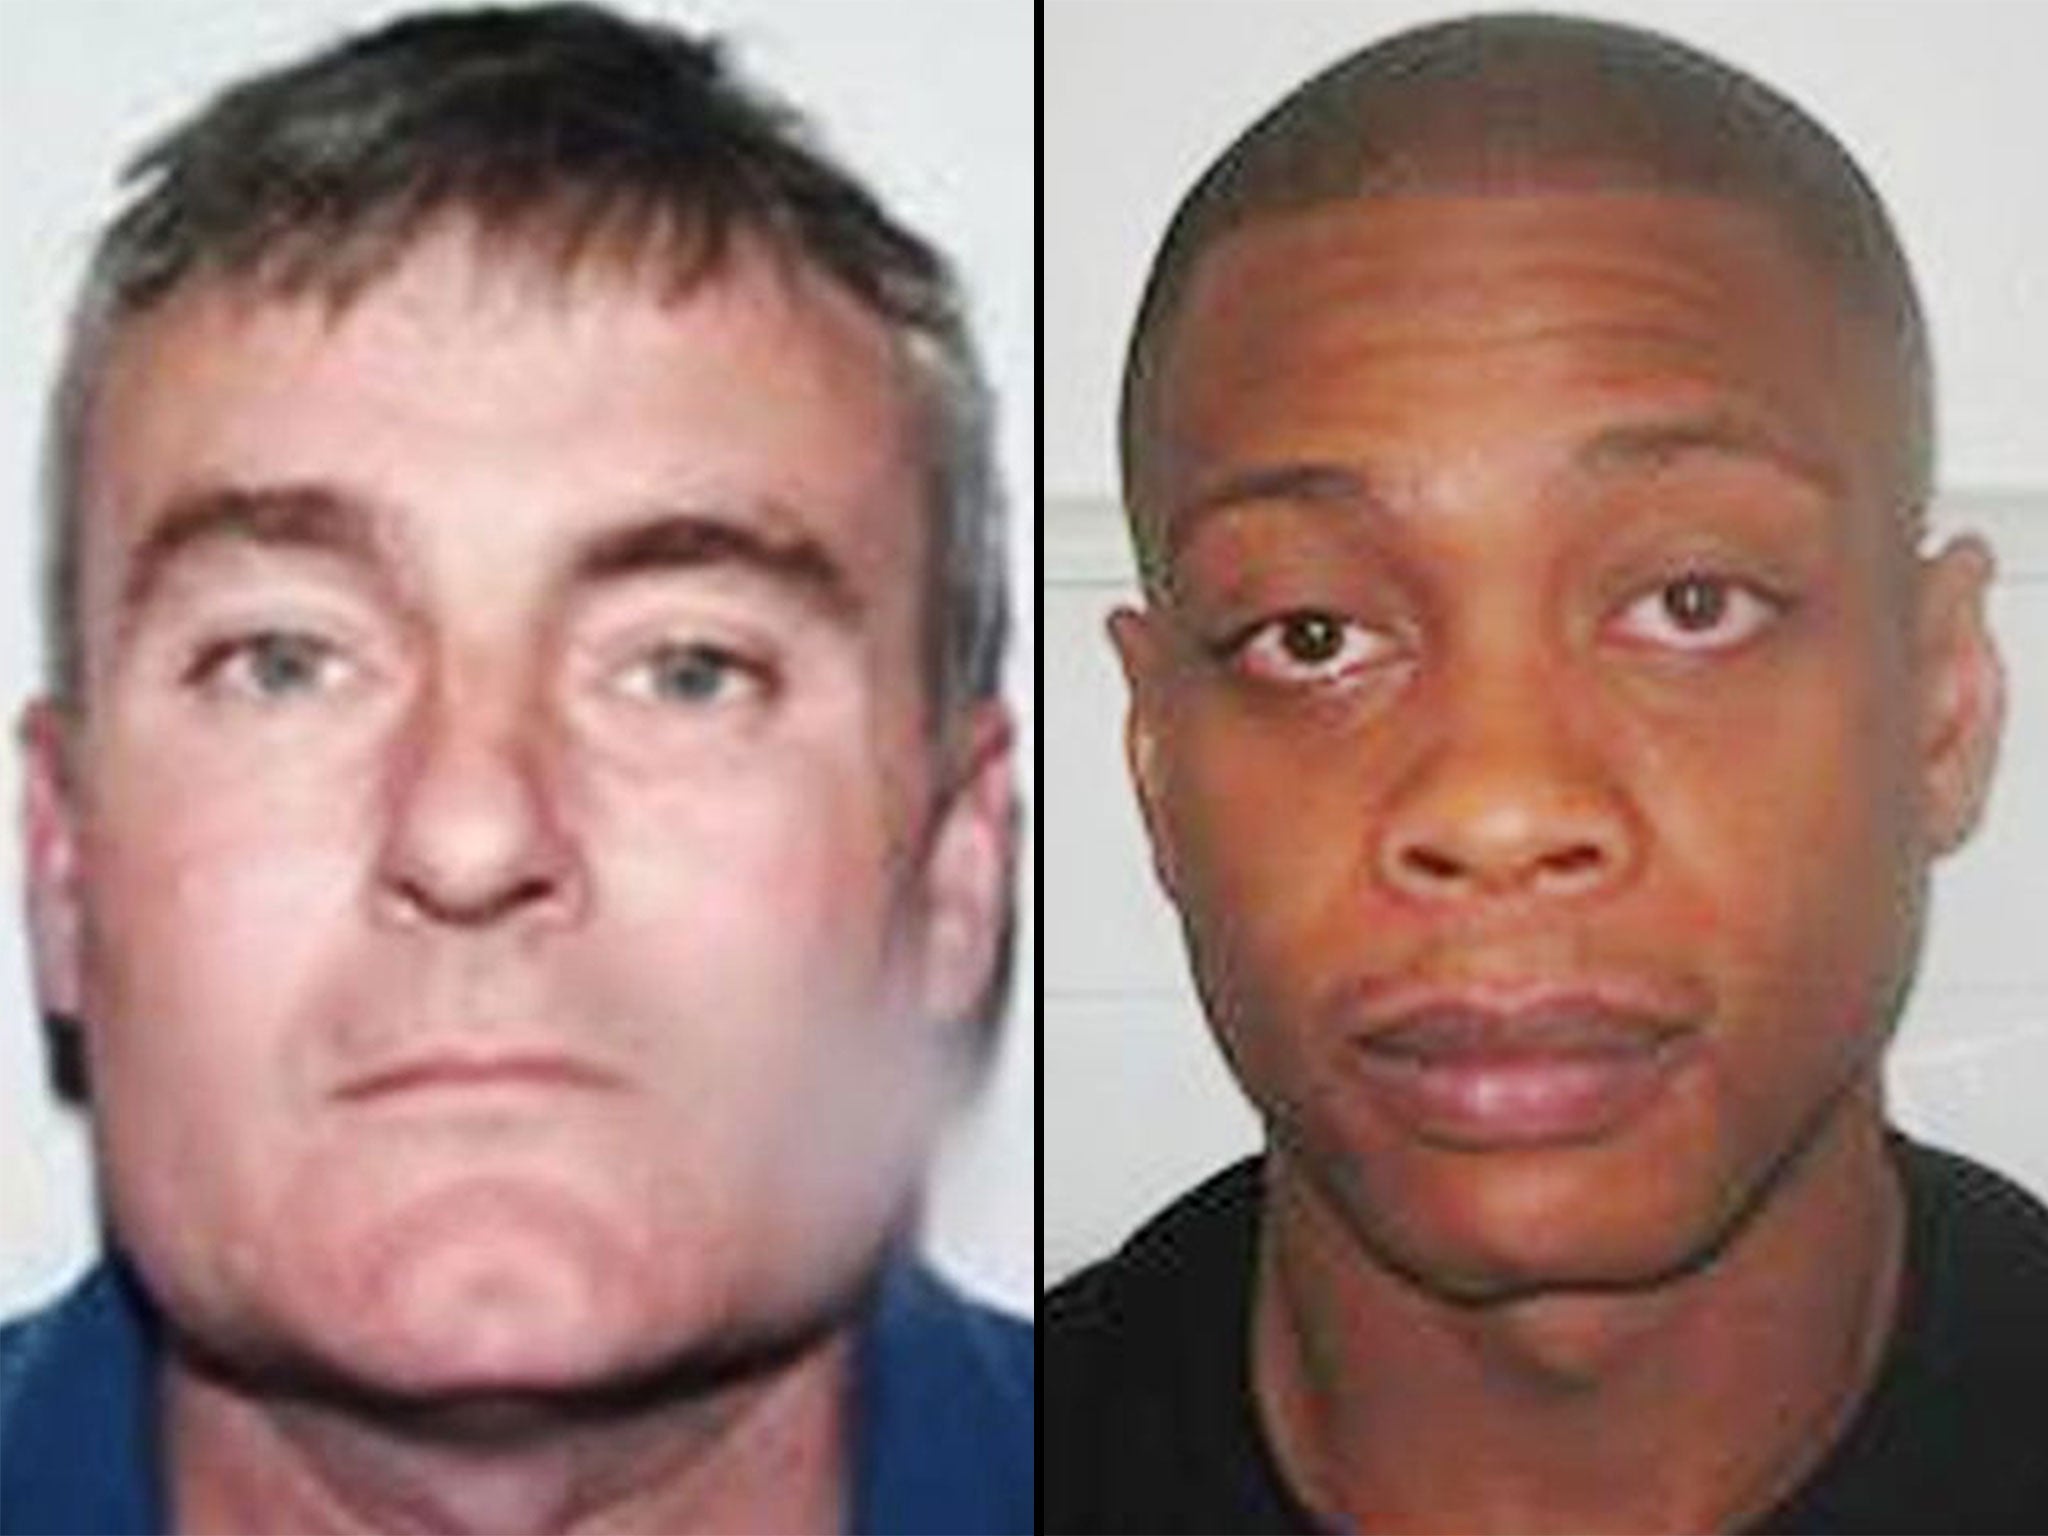 Paul Monk (left) and Jayson McDonald who were featured on the UK's most wanted list, have been captured